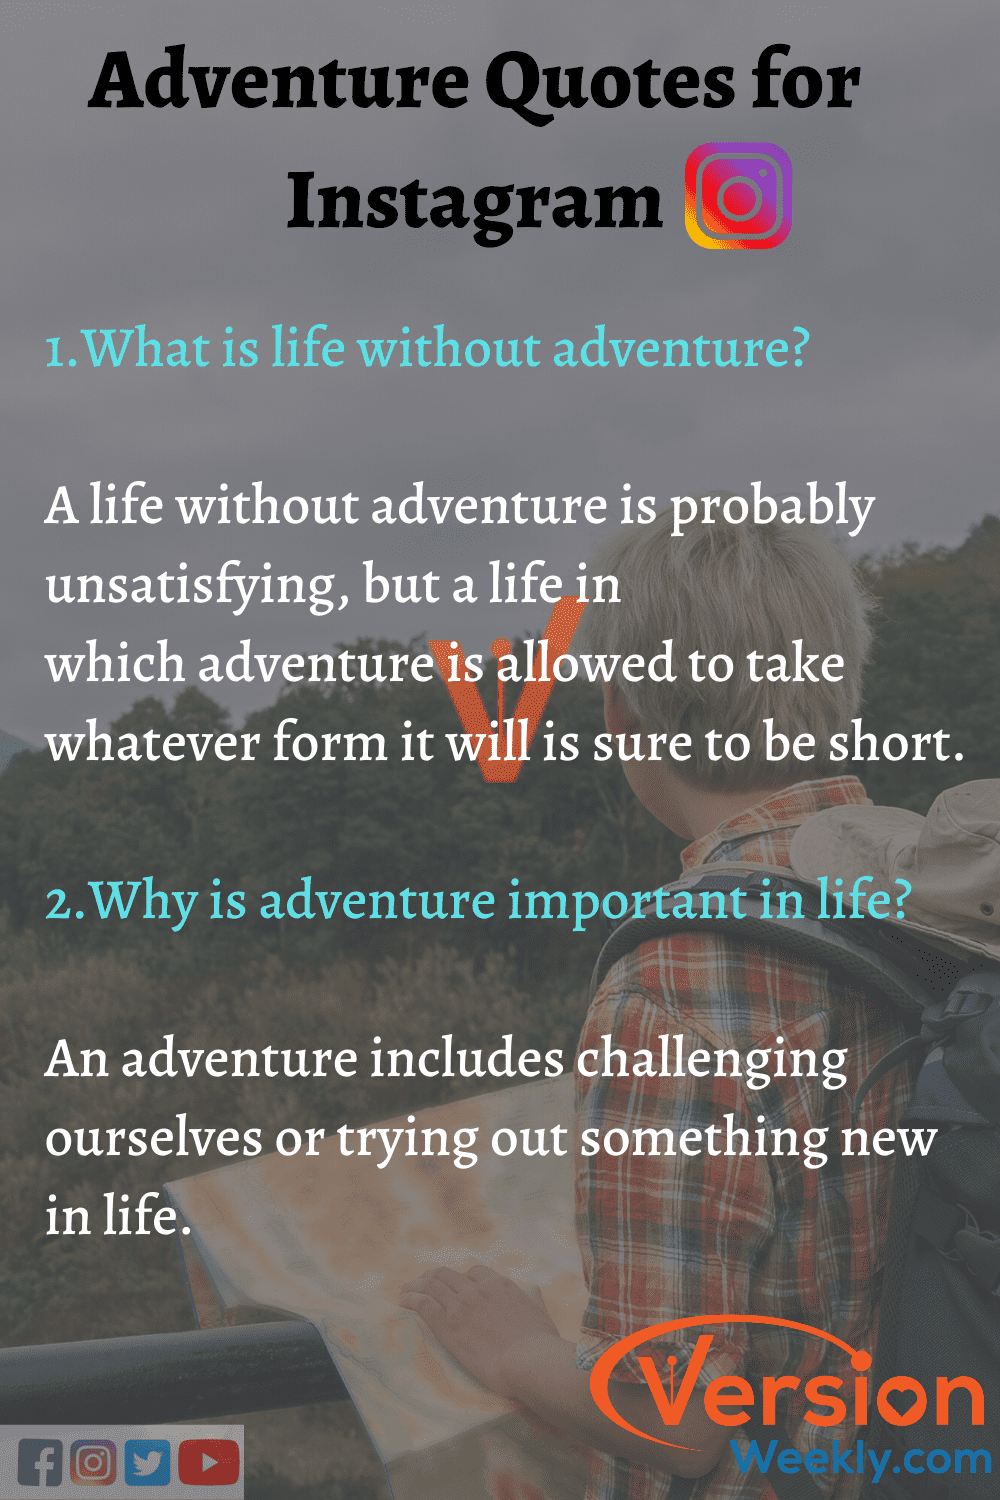 Adventure quotes for IG 